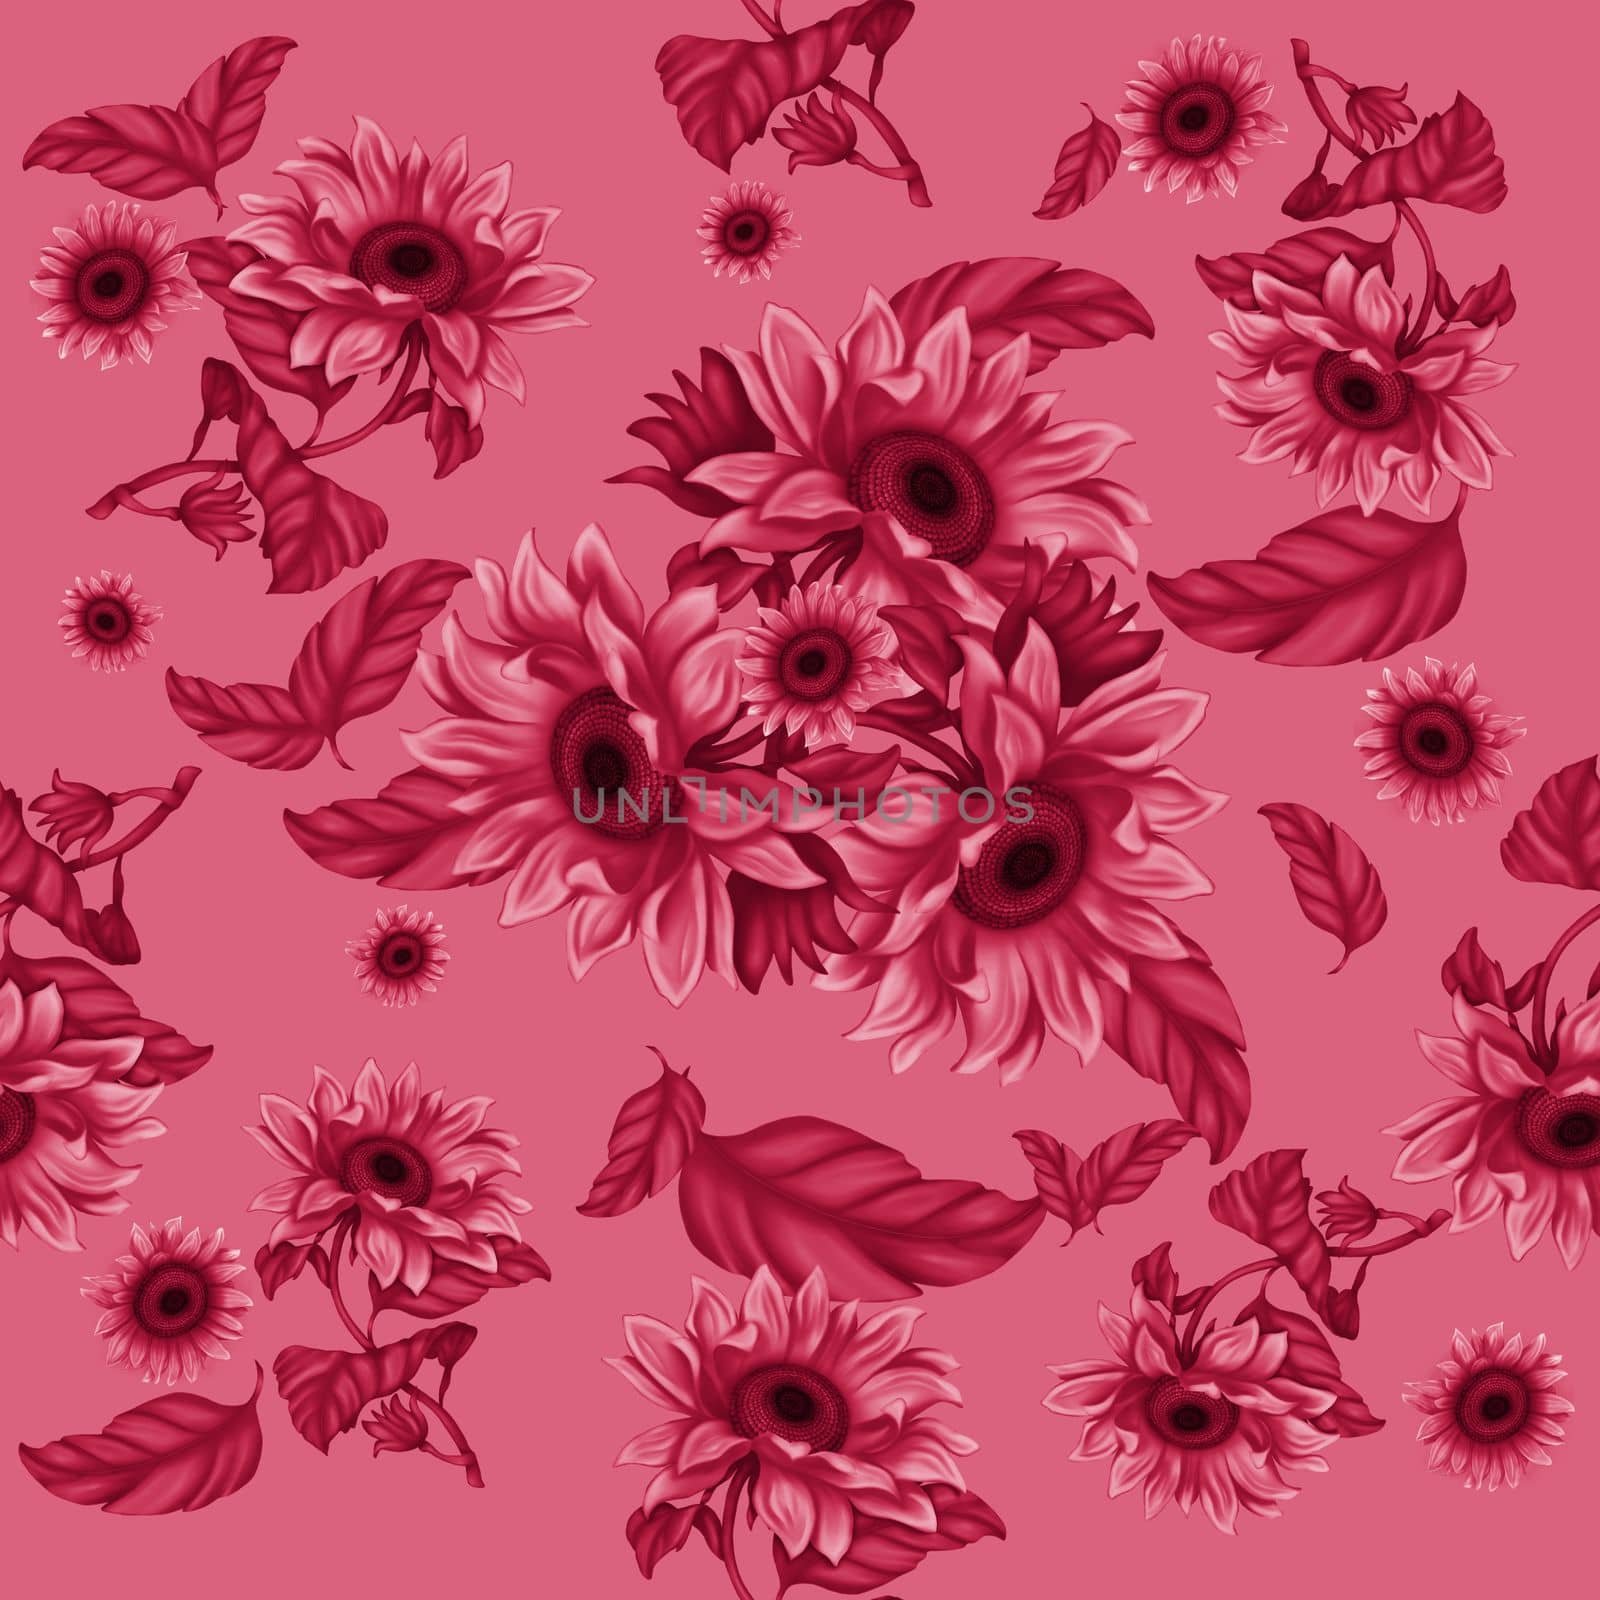 Seamless pattern for printing. Illustration of sunflower flowers. Bright flowers on a light background. Summer, sunflowers.Viva Magenta Background color